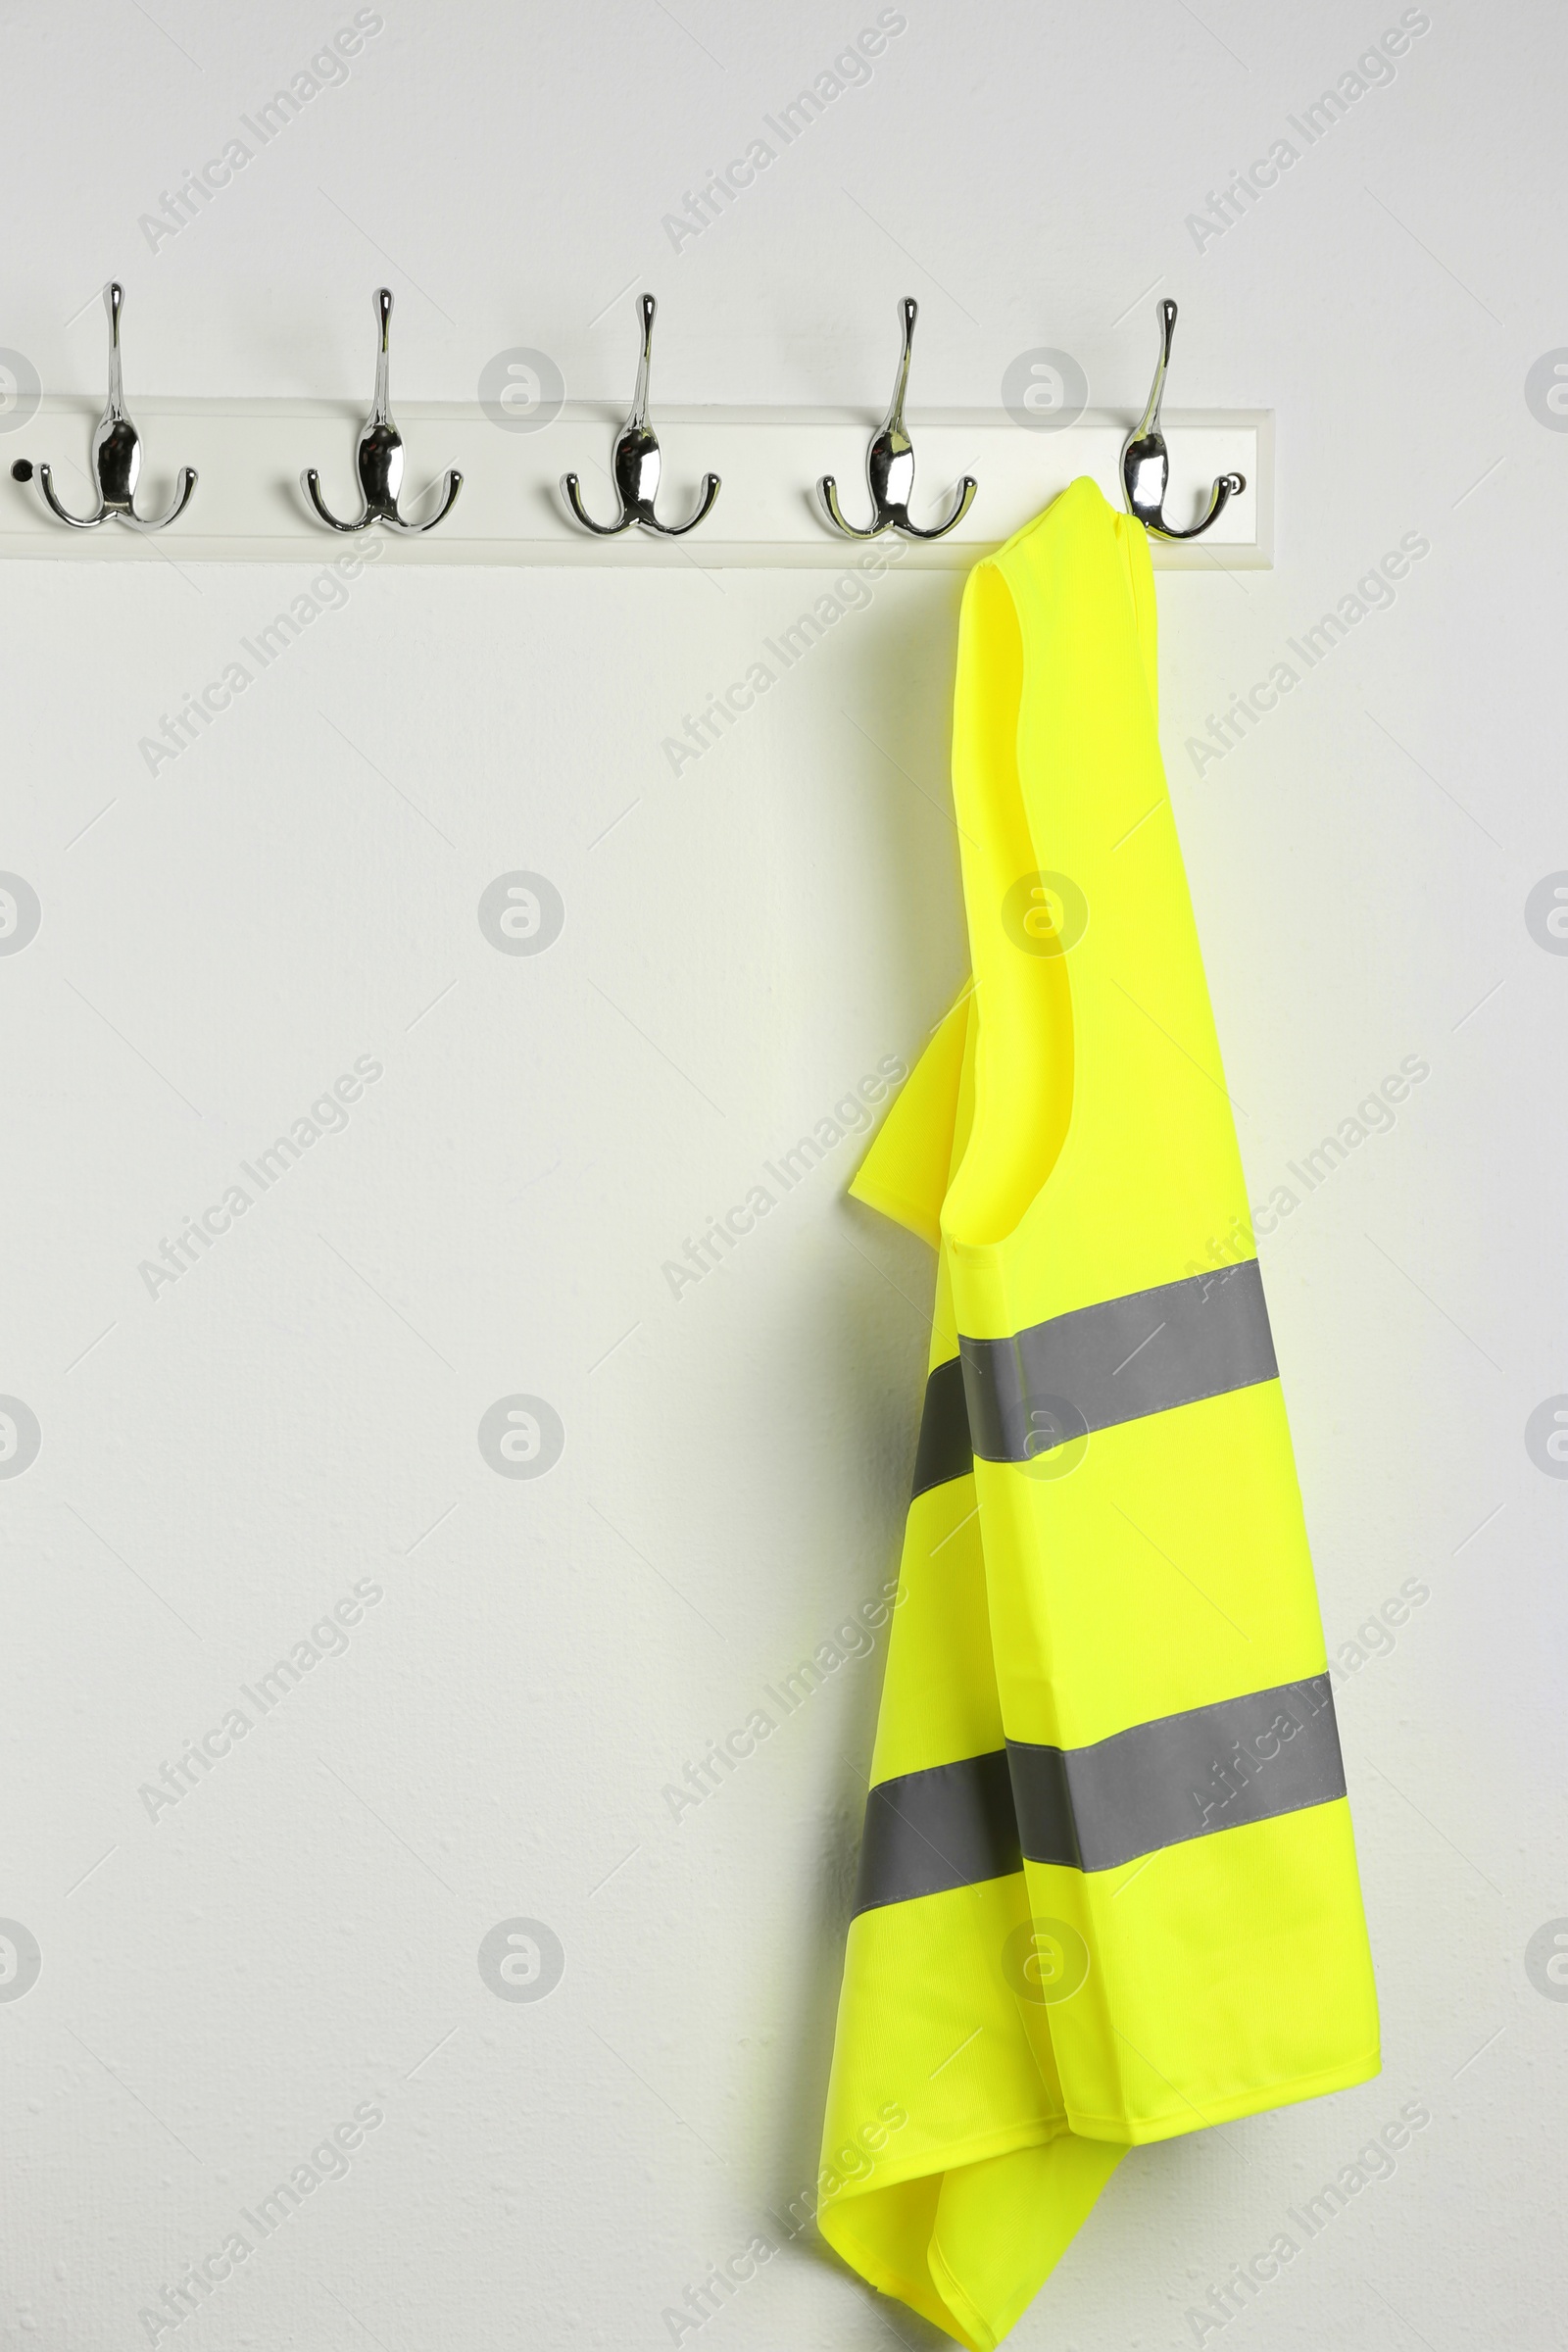 Photo of Reflective vest hanging on white wall. Safety equipment